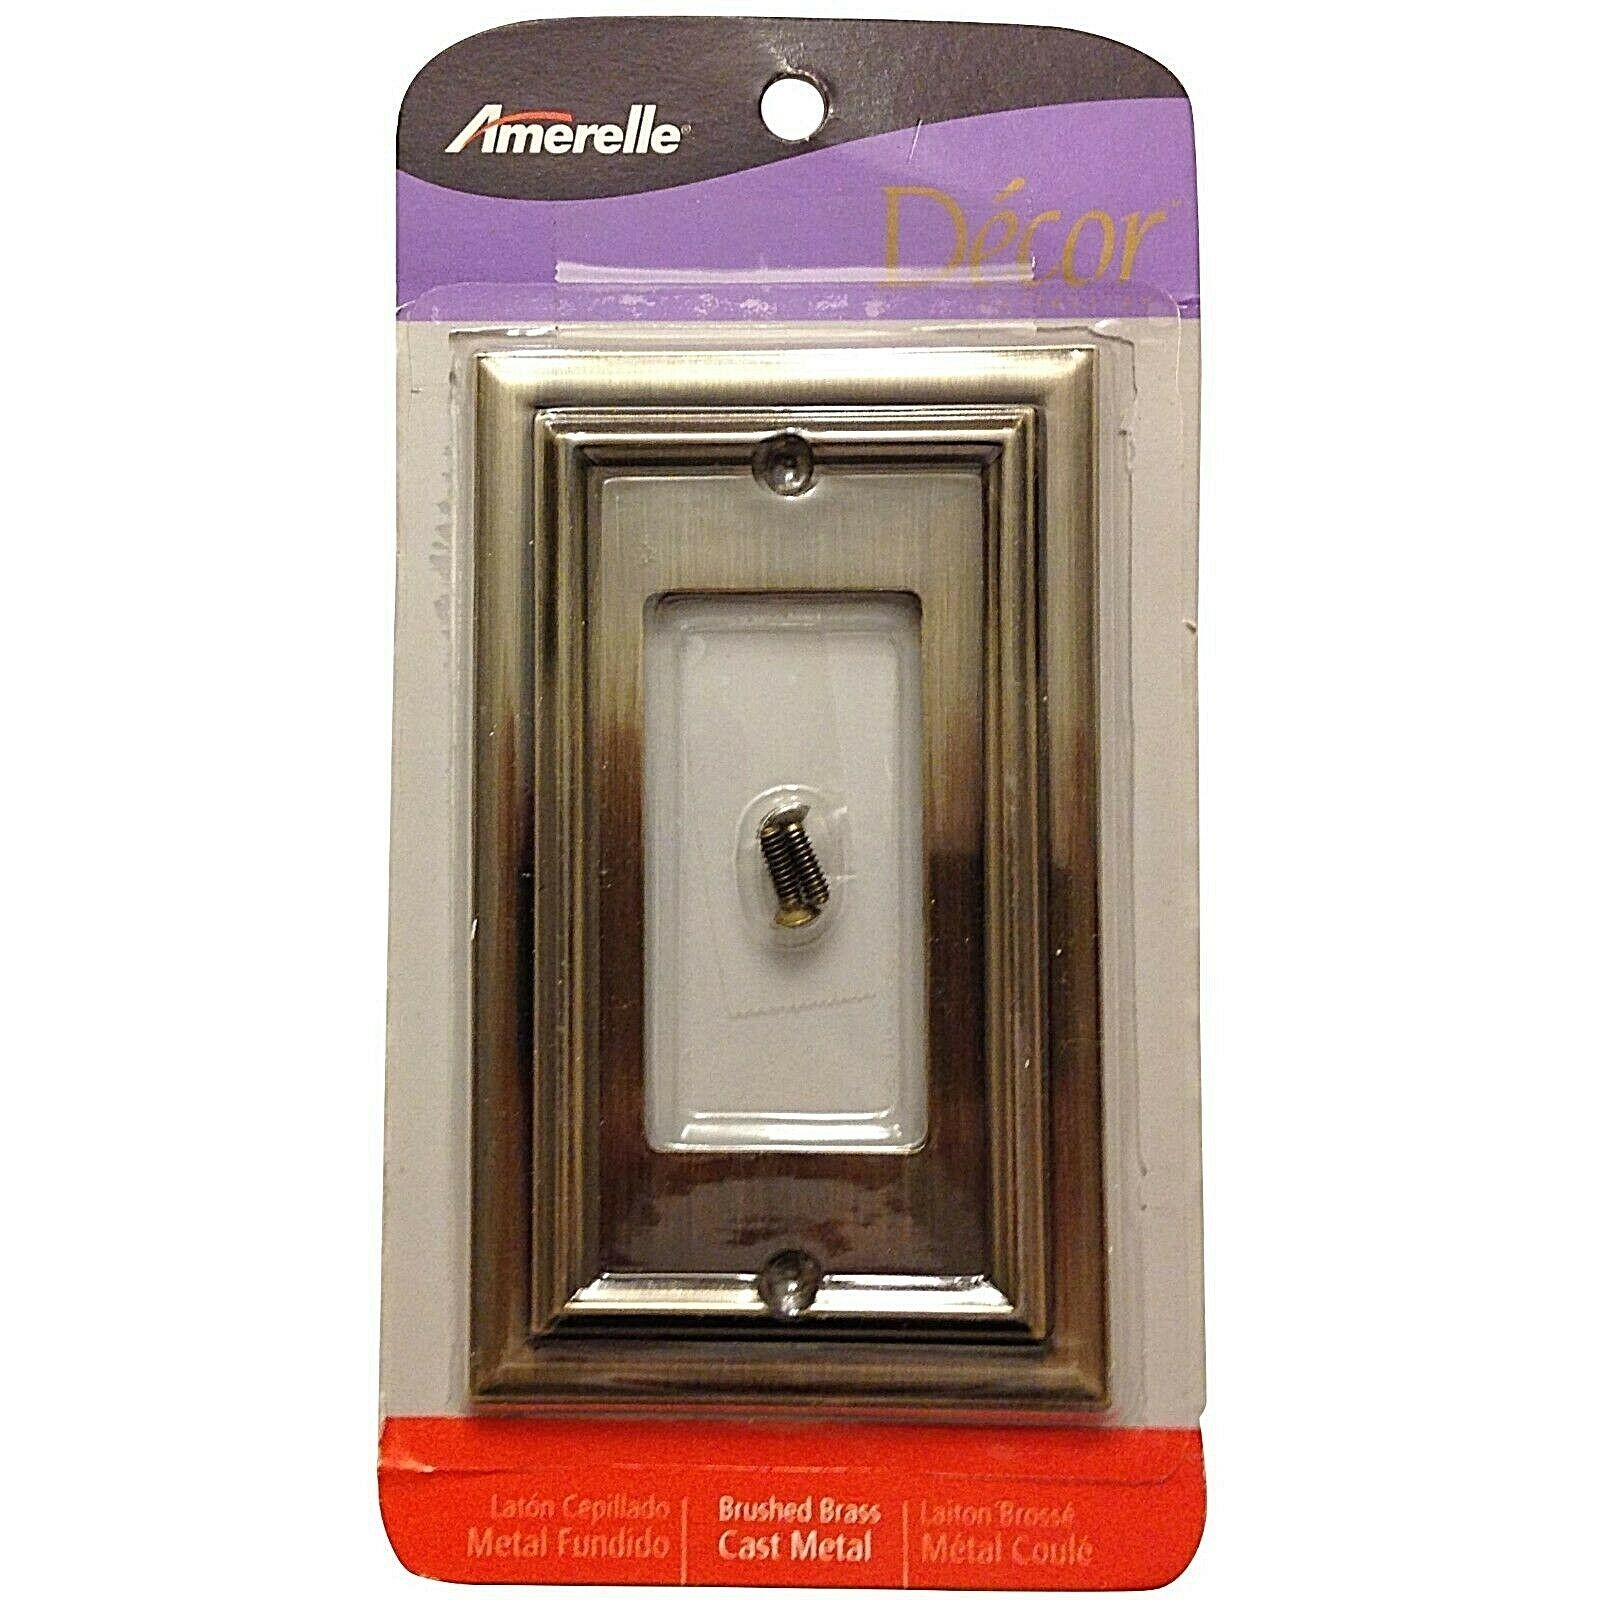 Amerelle, Rustic Brass, Cast Metal, Switch Plate - $7.95